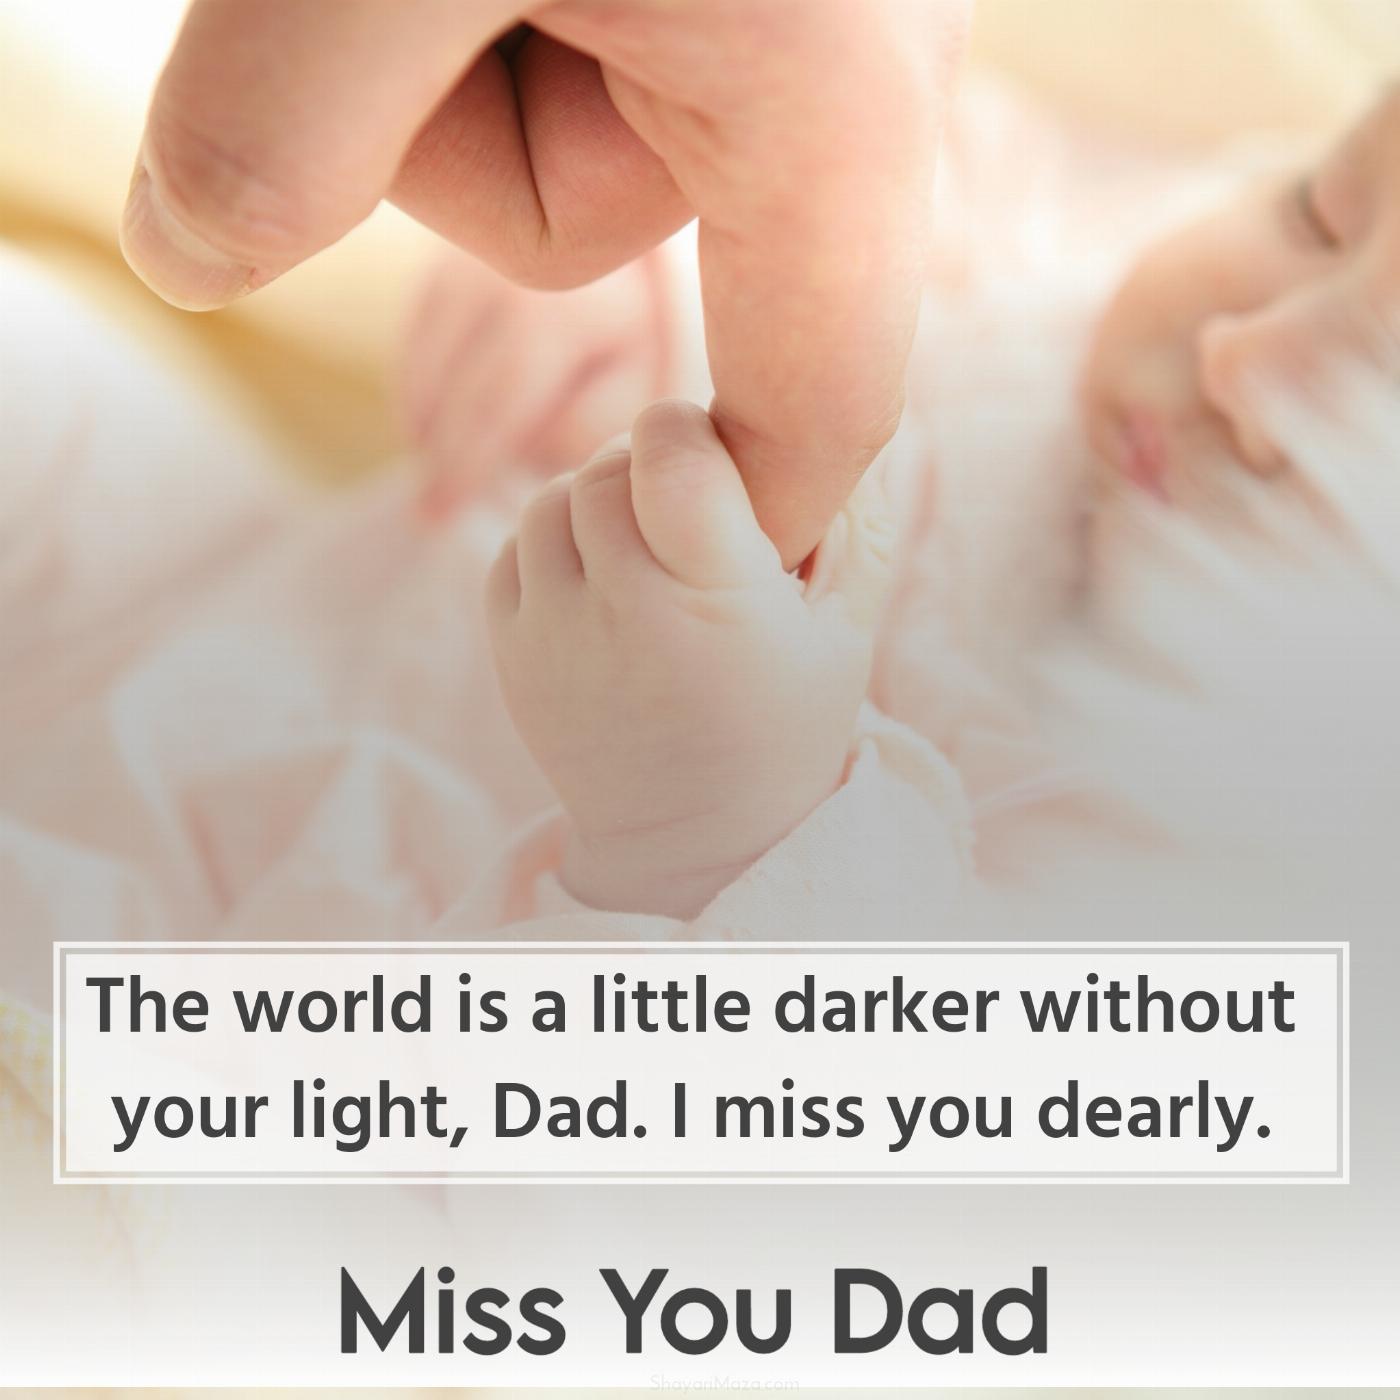 The world is a little darker without your light Dad